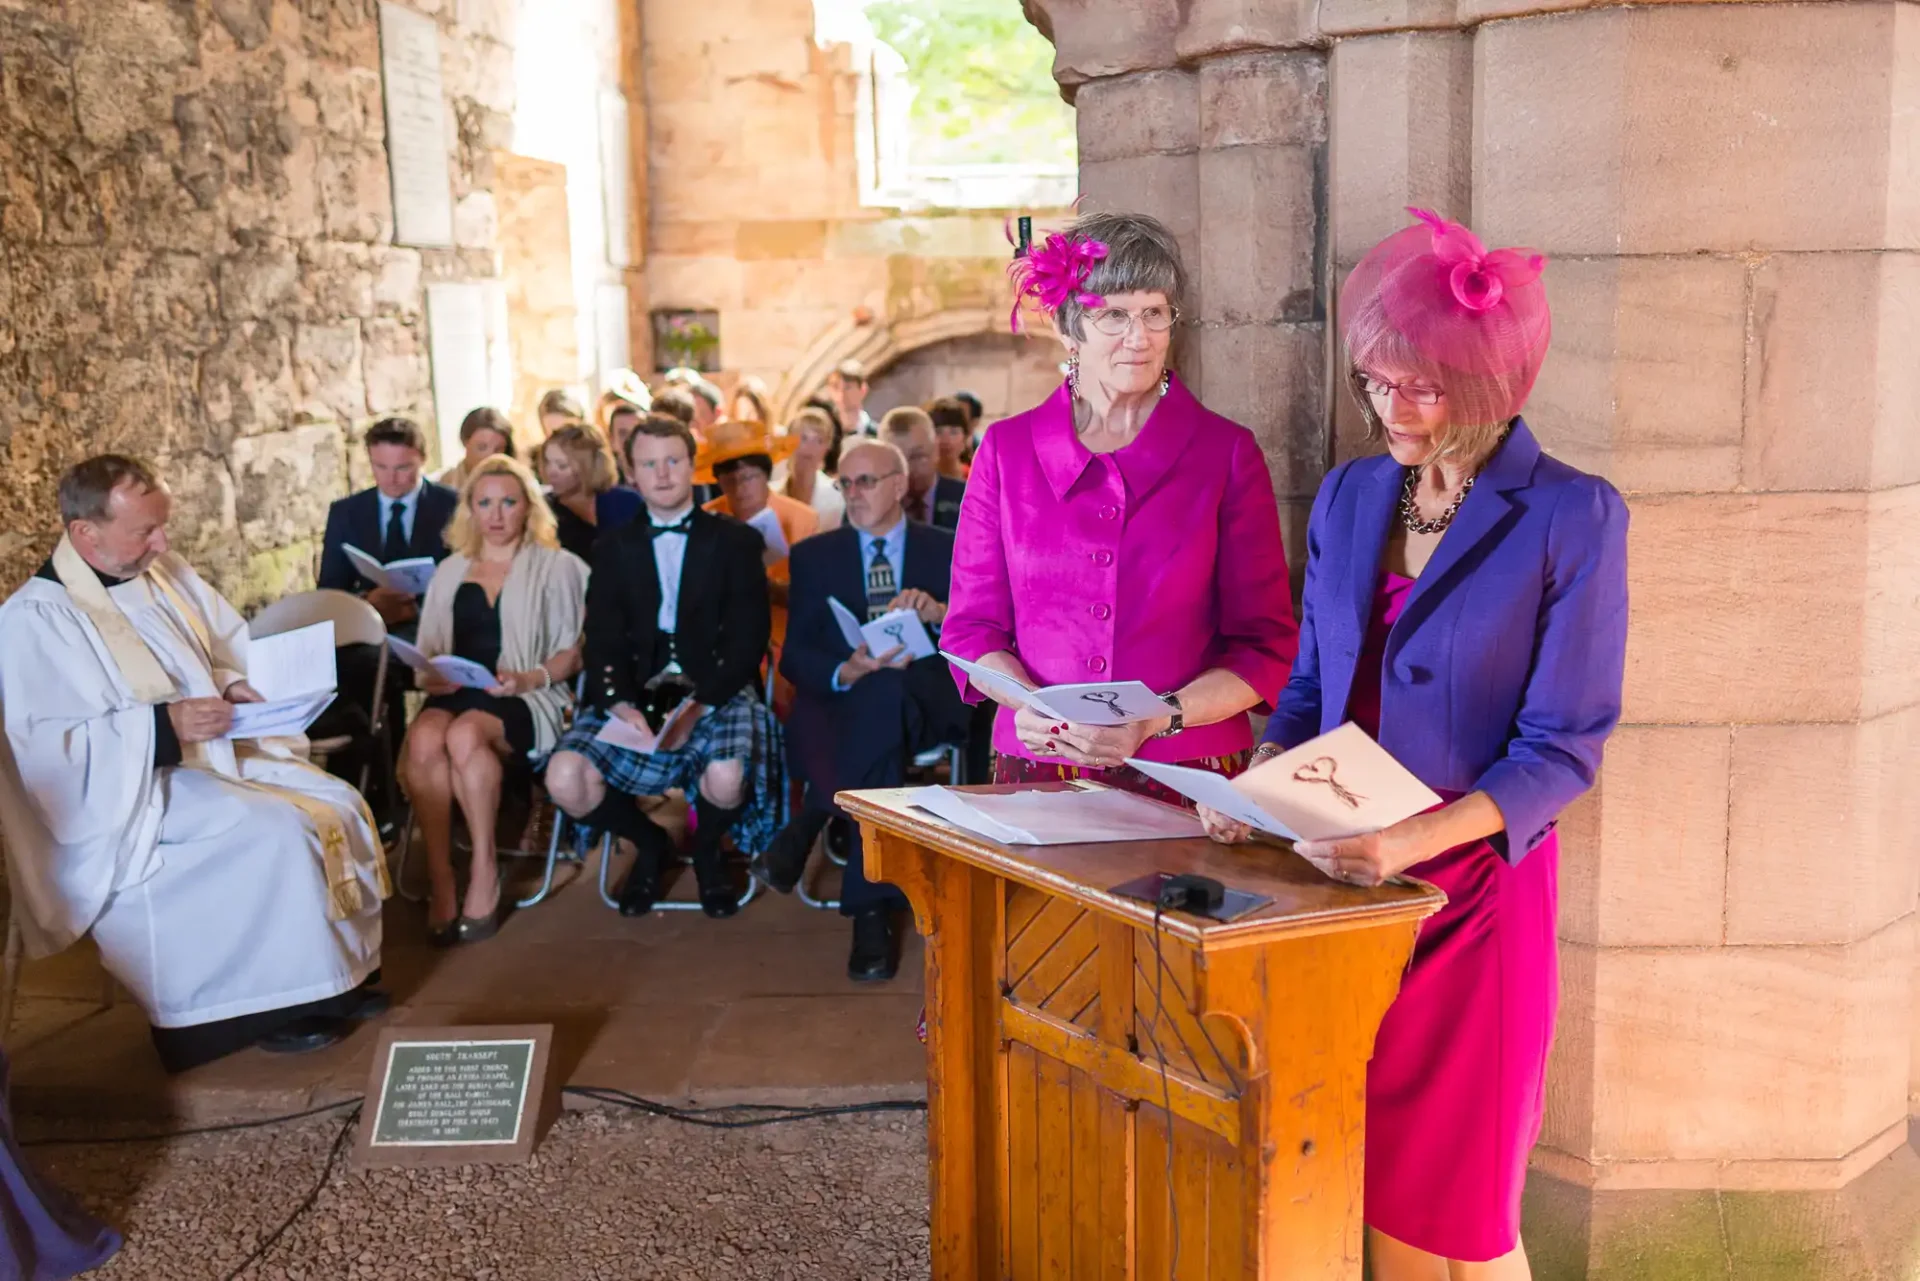 Two women in vibrant purple outfits are reading from papers at a lectern during a ceremony, with guests seated in the background.